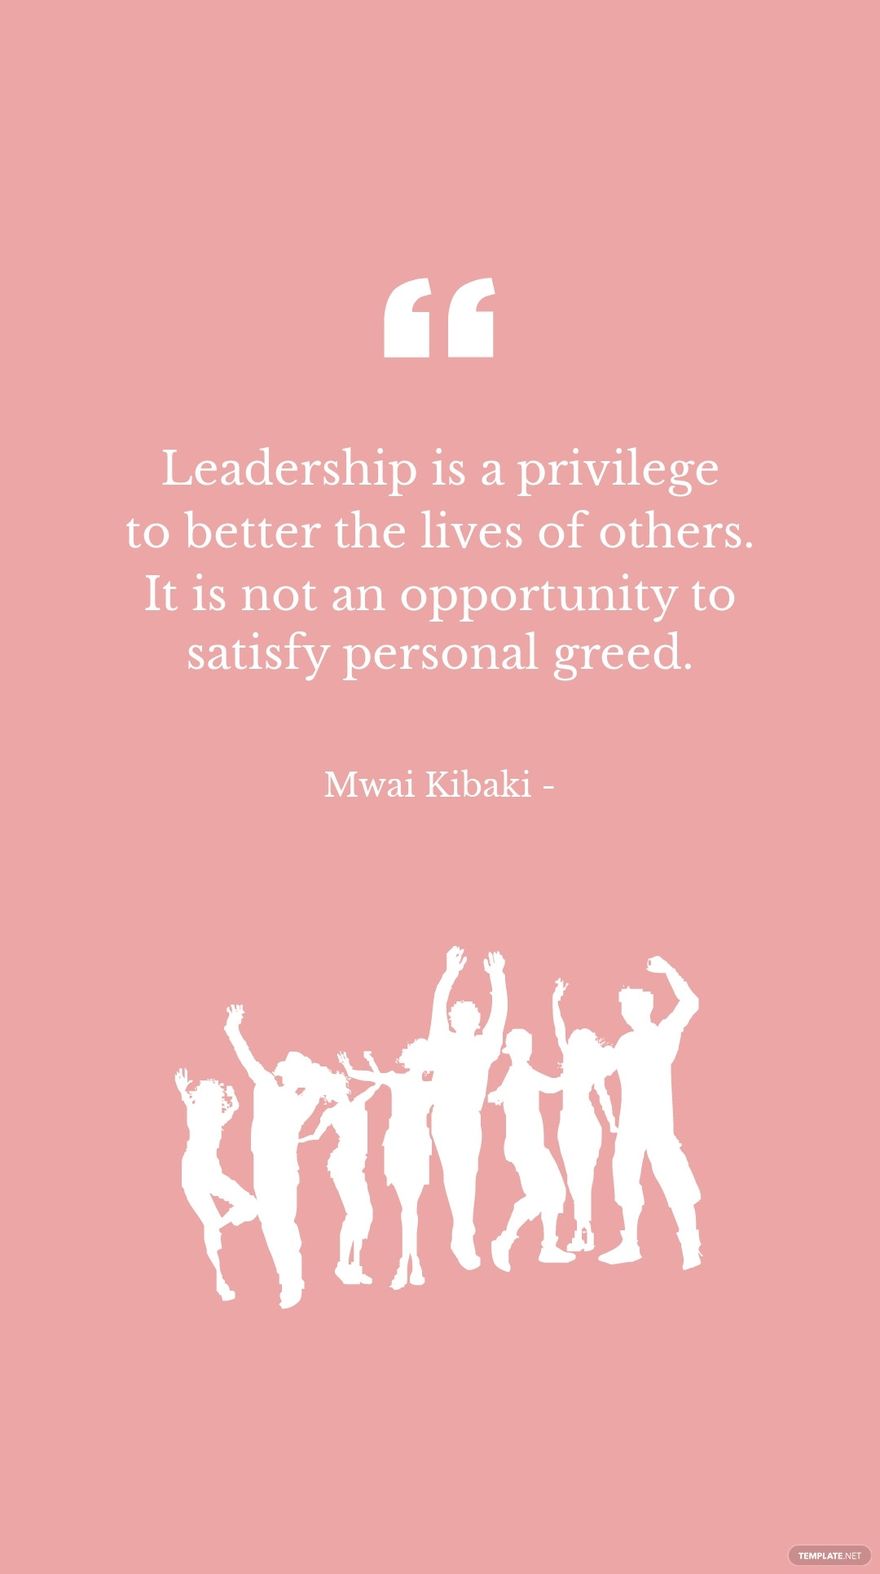 Mwai Kibaki - Leadership is a privilege to better the lives of others. It is not an opportunity to satisfy personal greed.